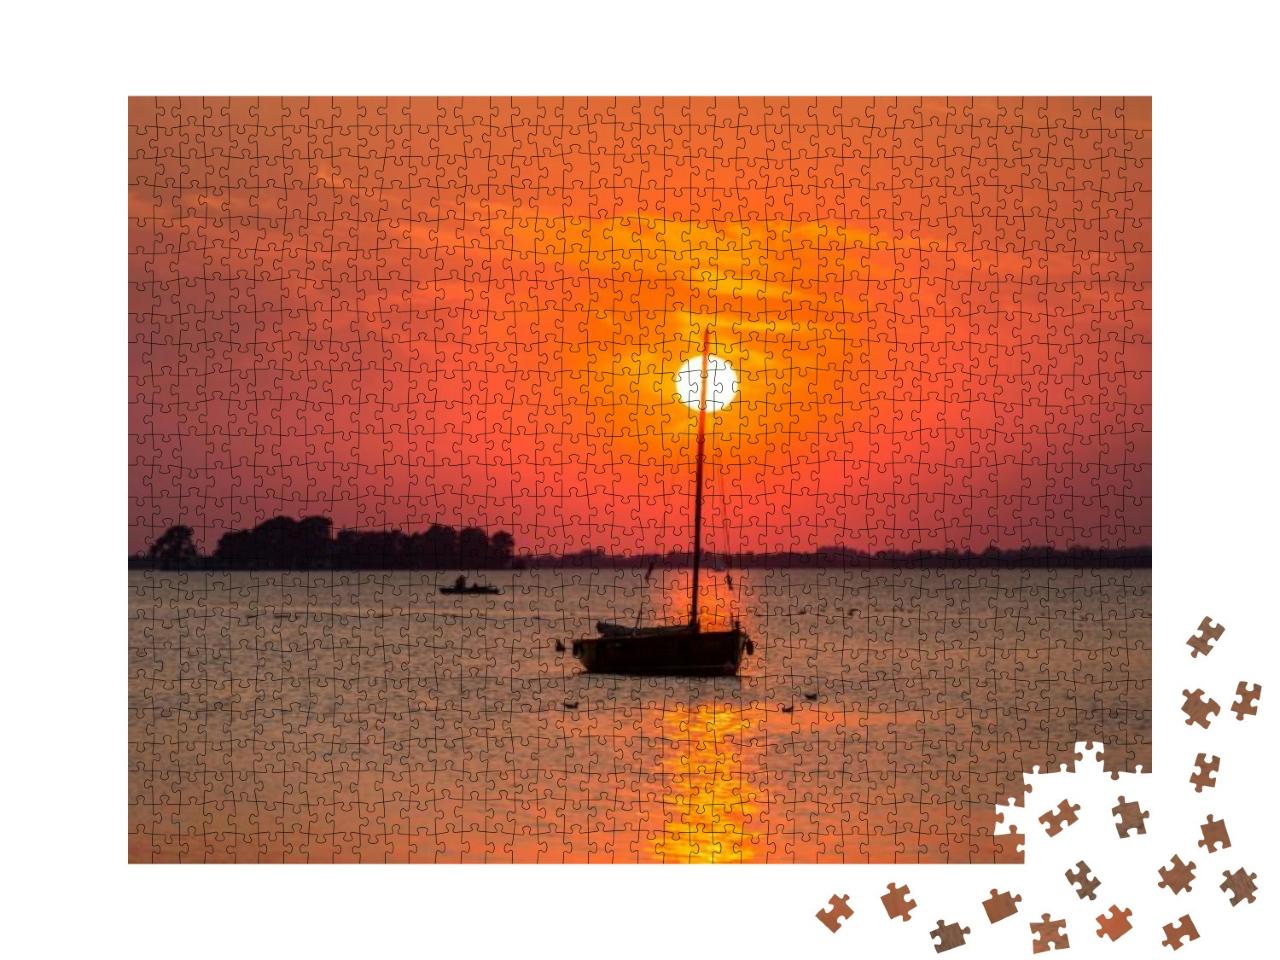 Beautiful Boat on a Lake in the Beautiful Red Light Sunse... Jigsaw Puzzle with 1000 pieces